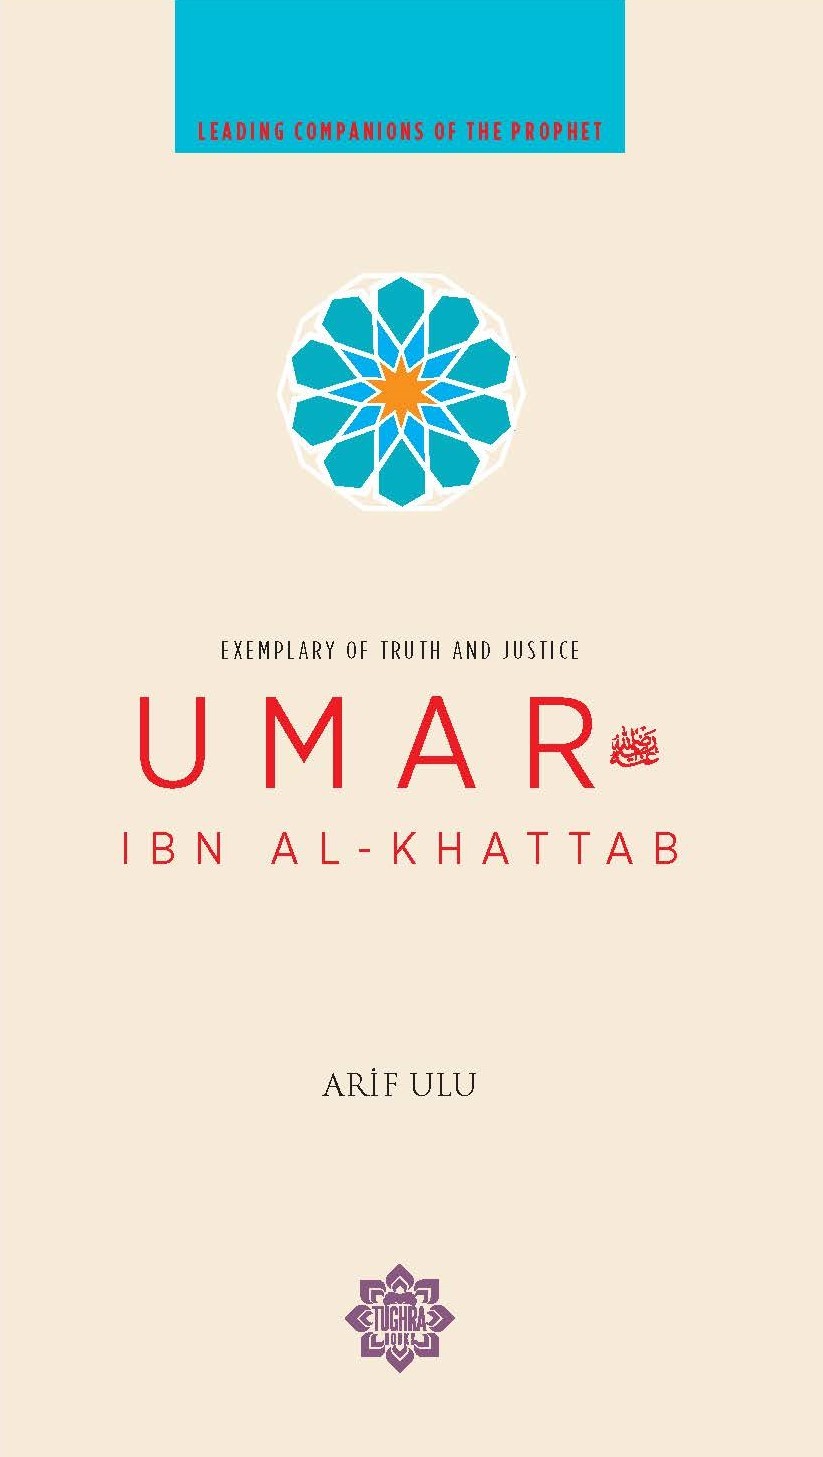 Umar Ibn Al Khattab (Exemplary of Truth and Justice) - Leading Companions of the Prophet